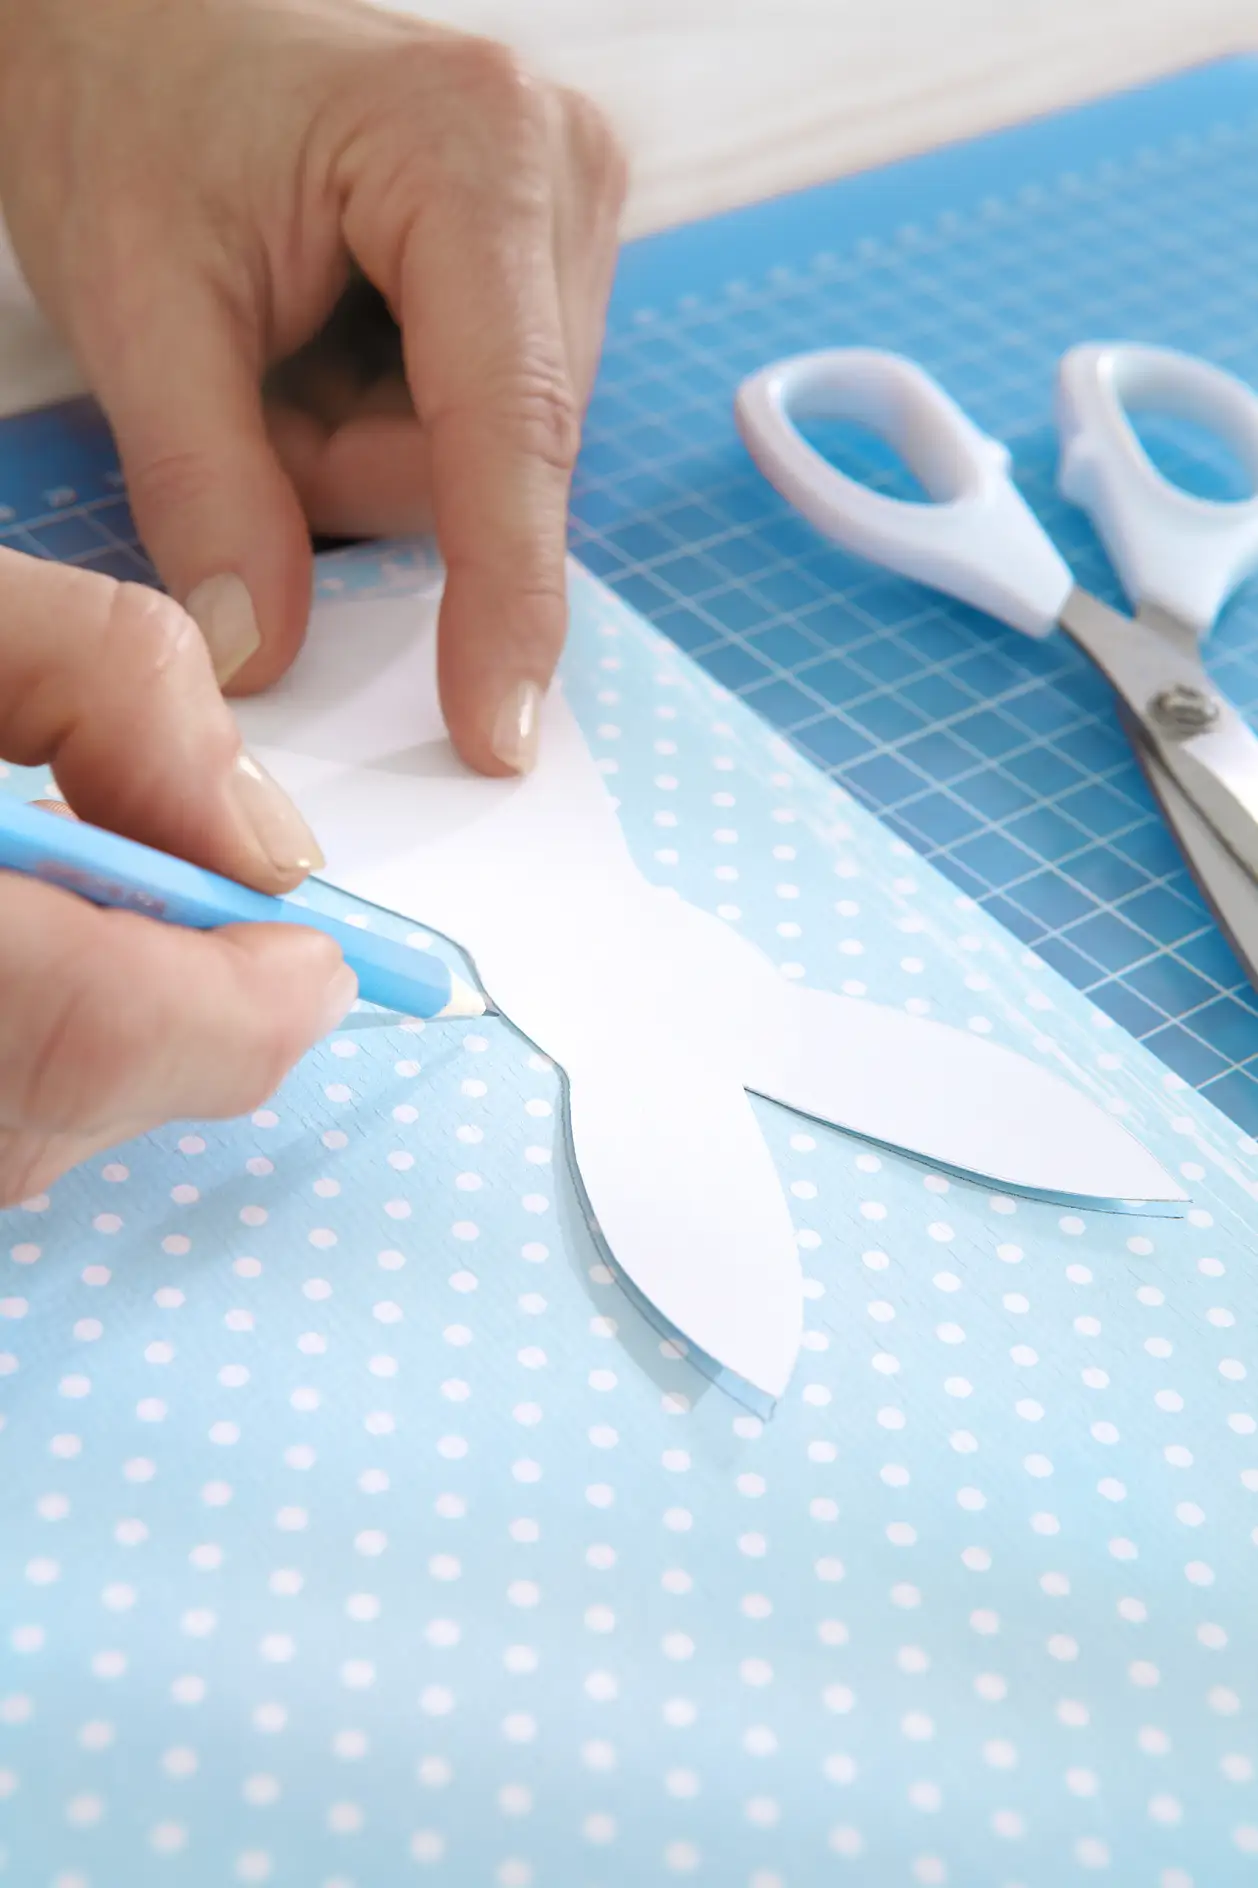 Make a rabbit template out of thick paper.